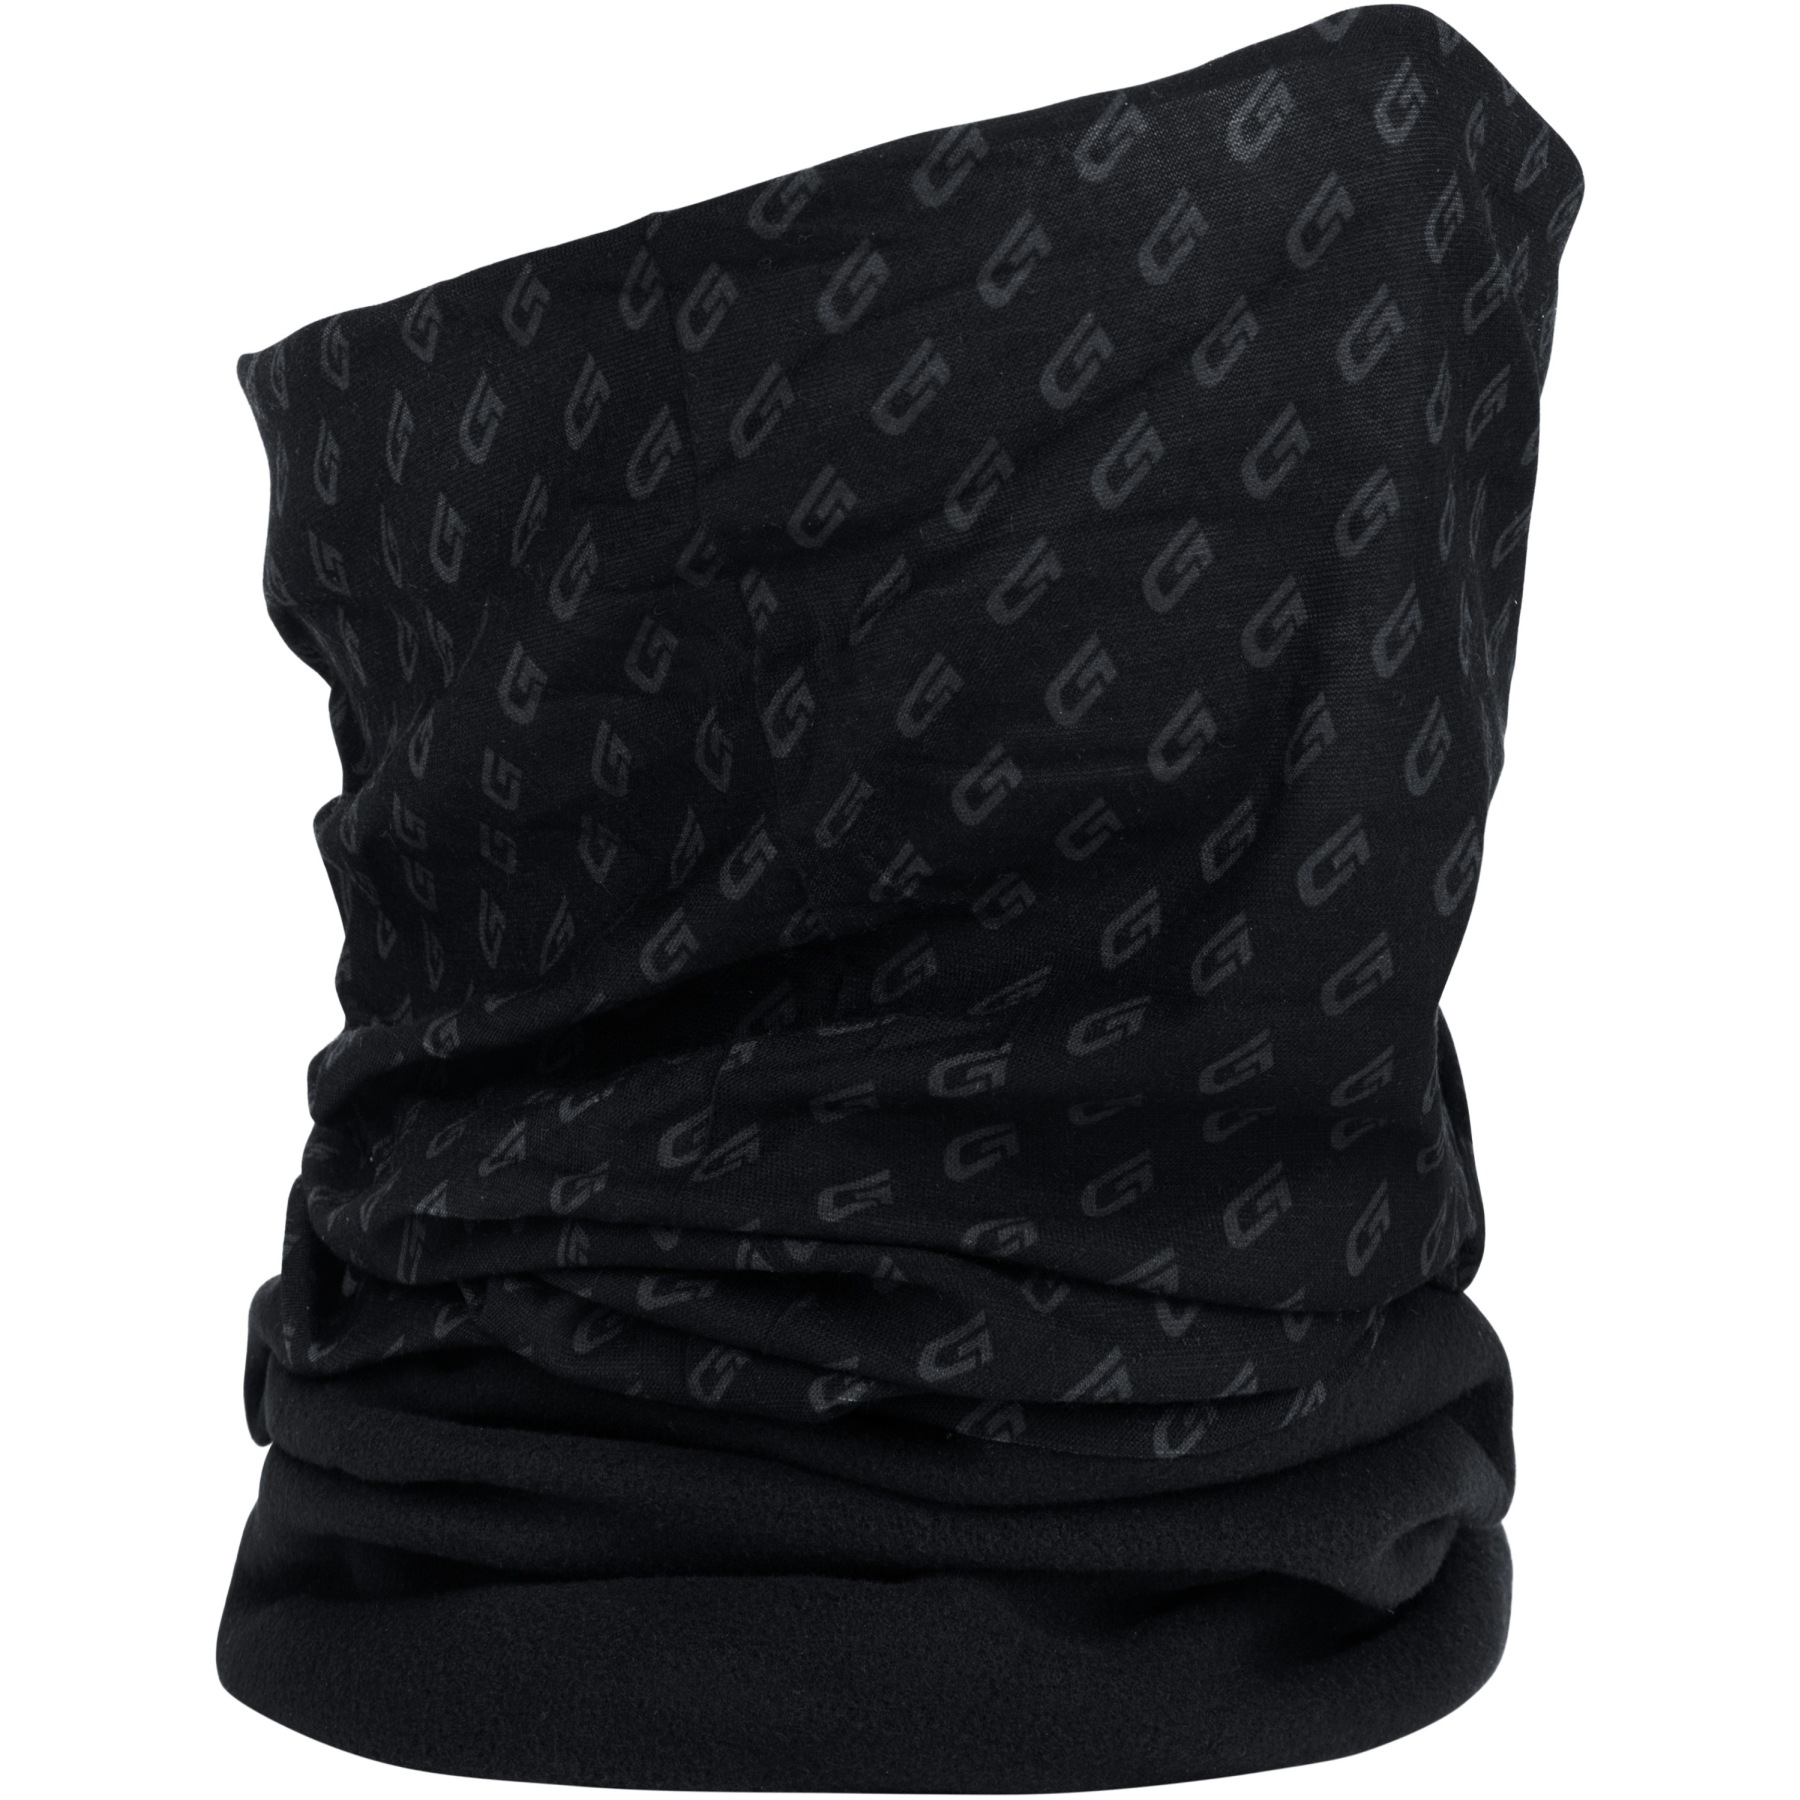 Picture of GripGrab Multifunctional Thermal Fleece Neck Warmer - Black